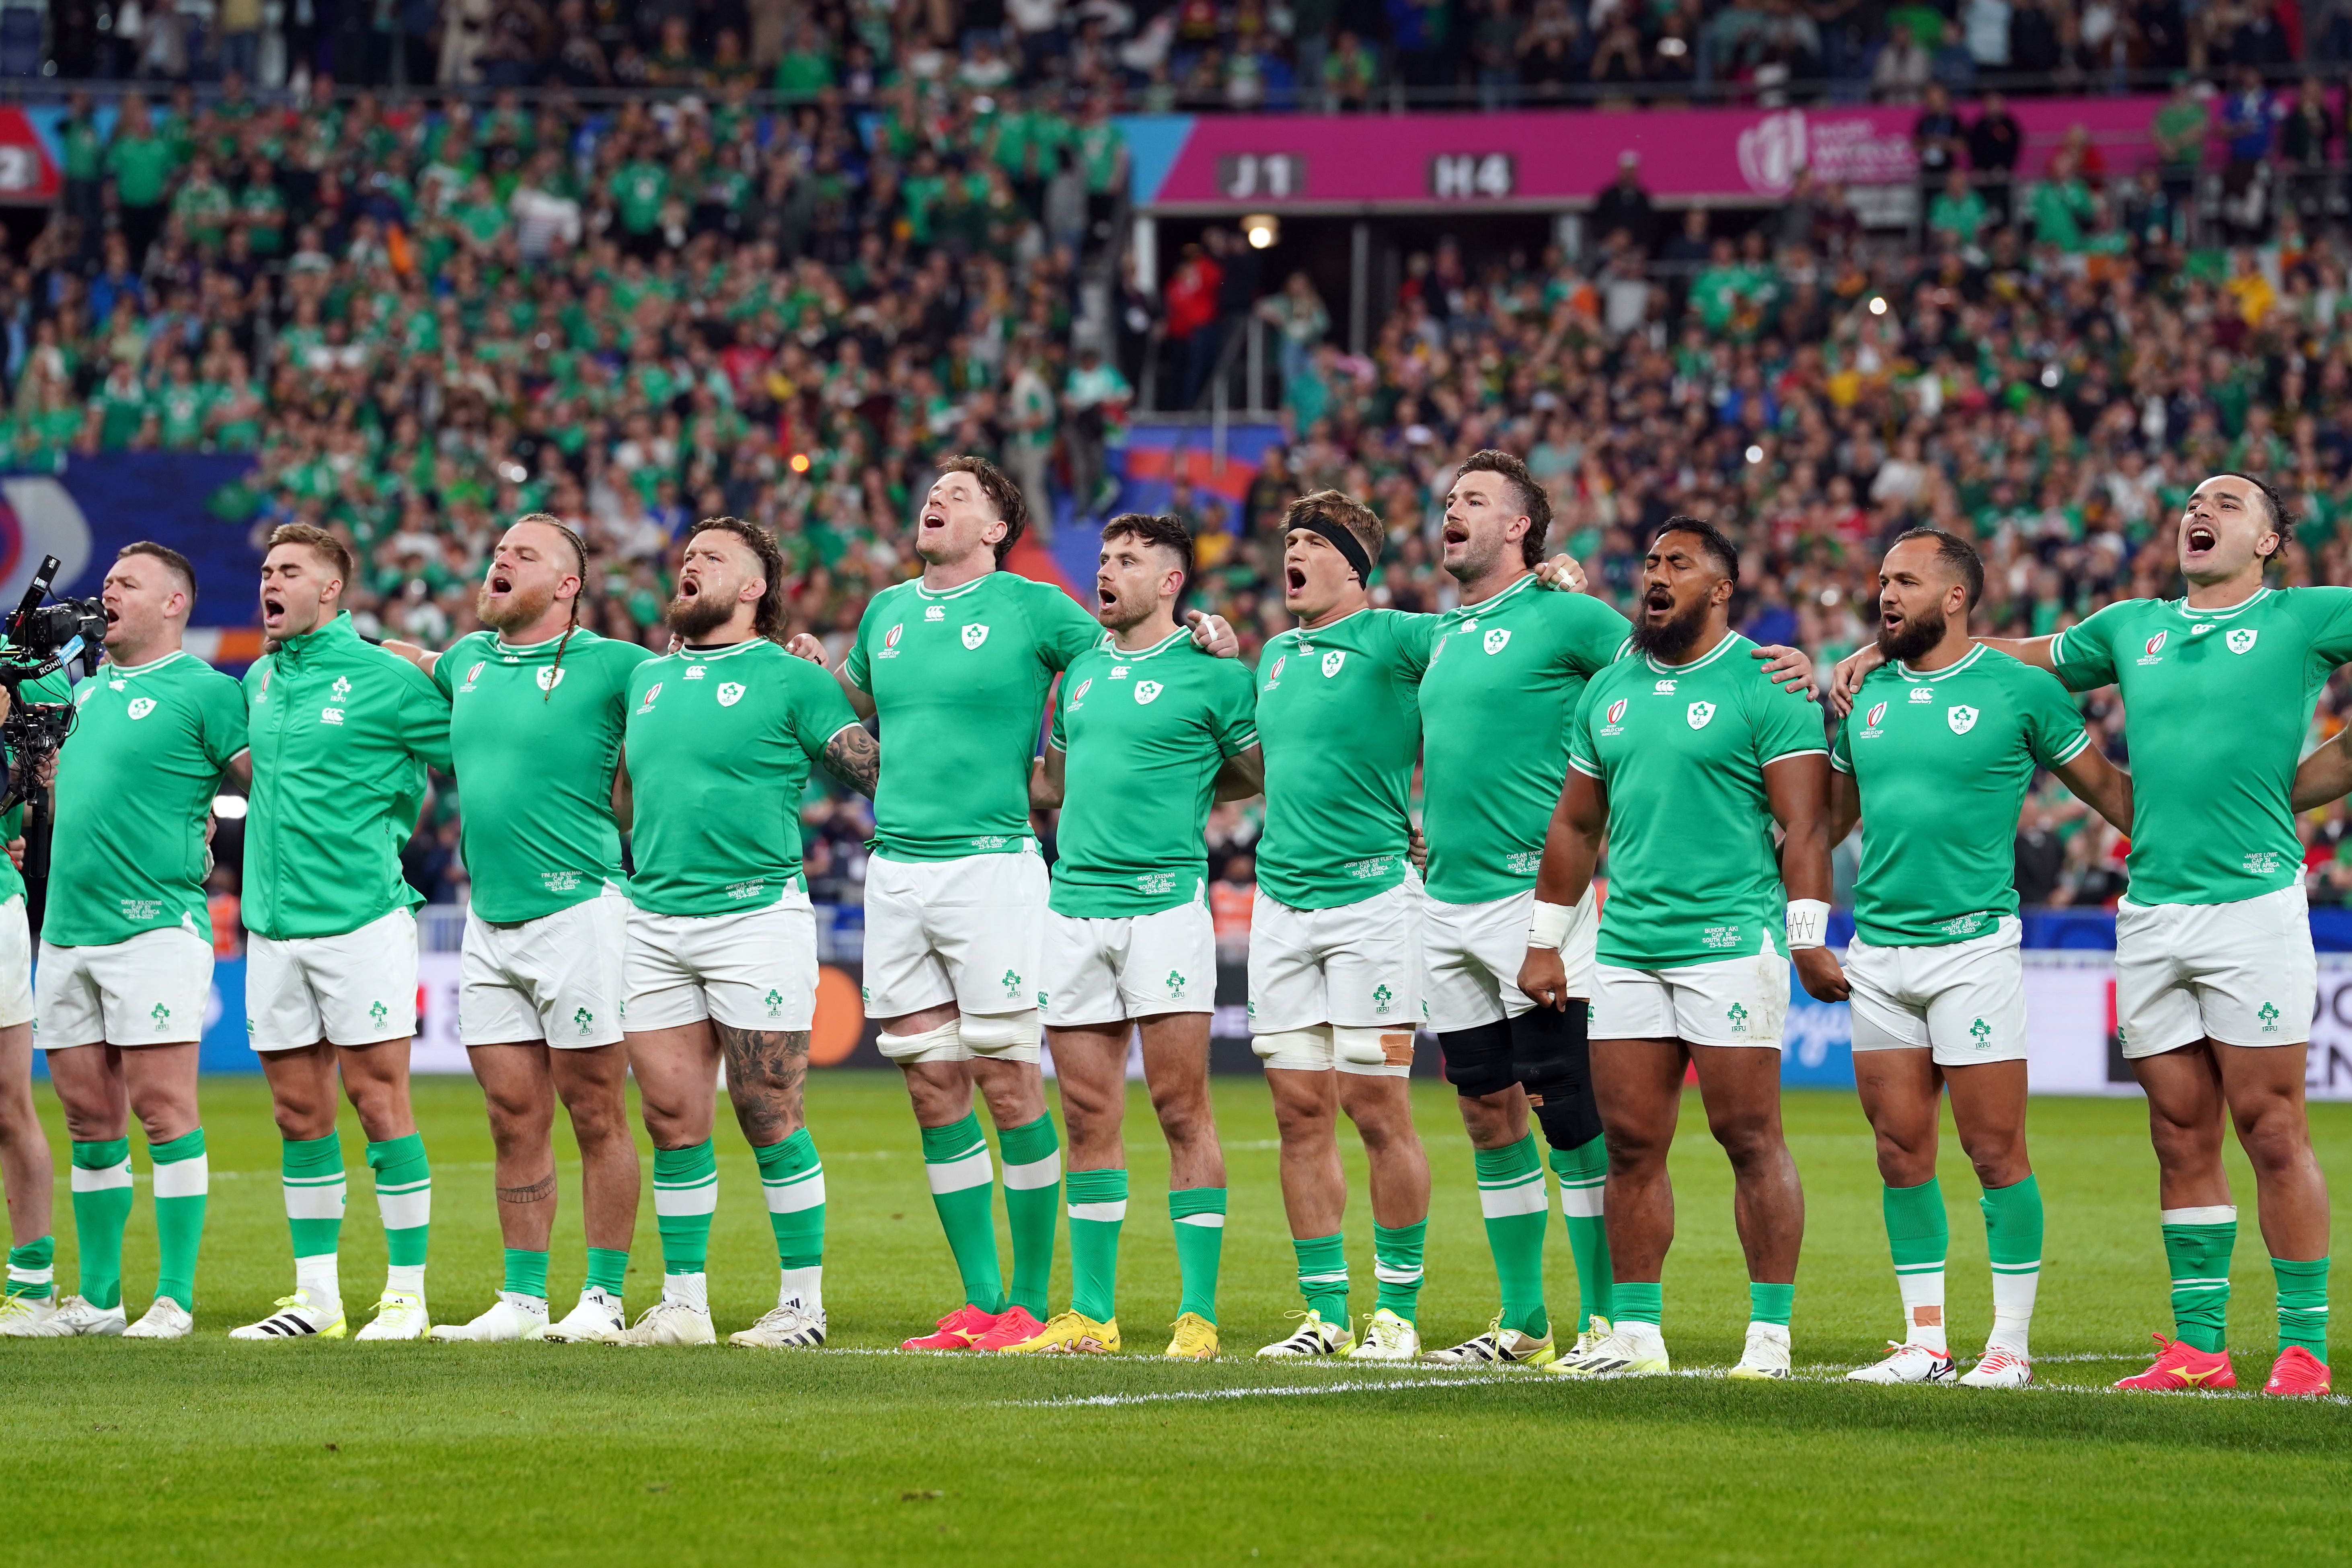 ireland scotland rugby live streaming